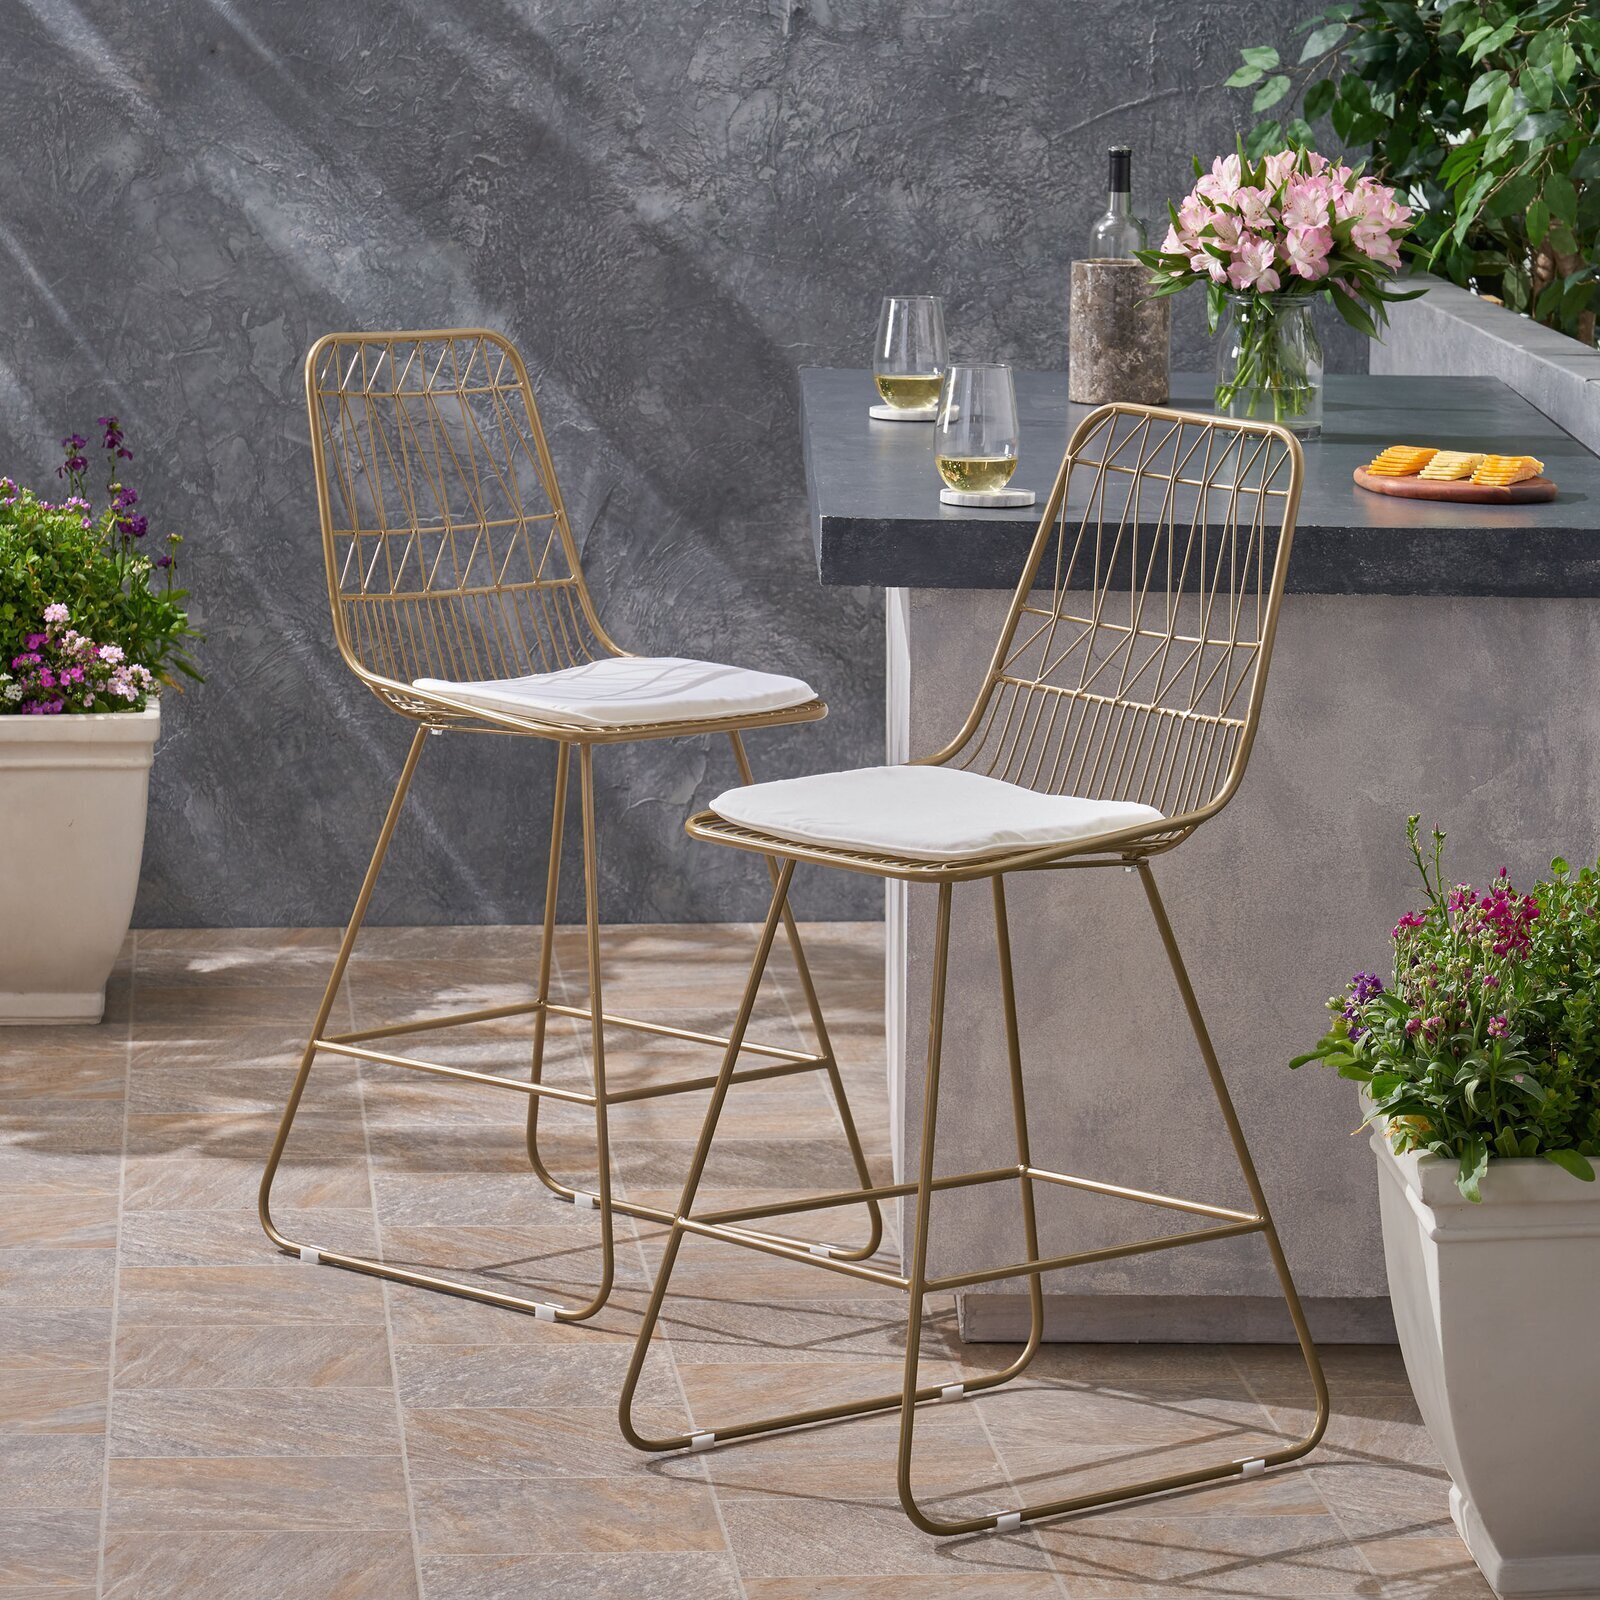 Modern outdoor bar stools with cushion